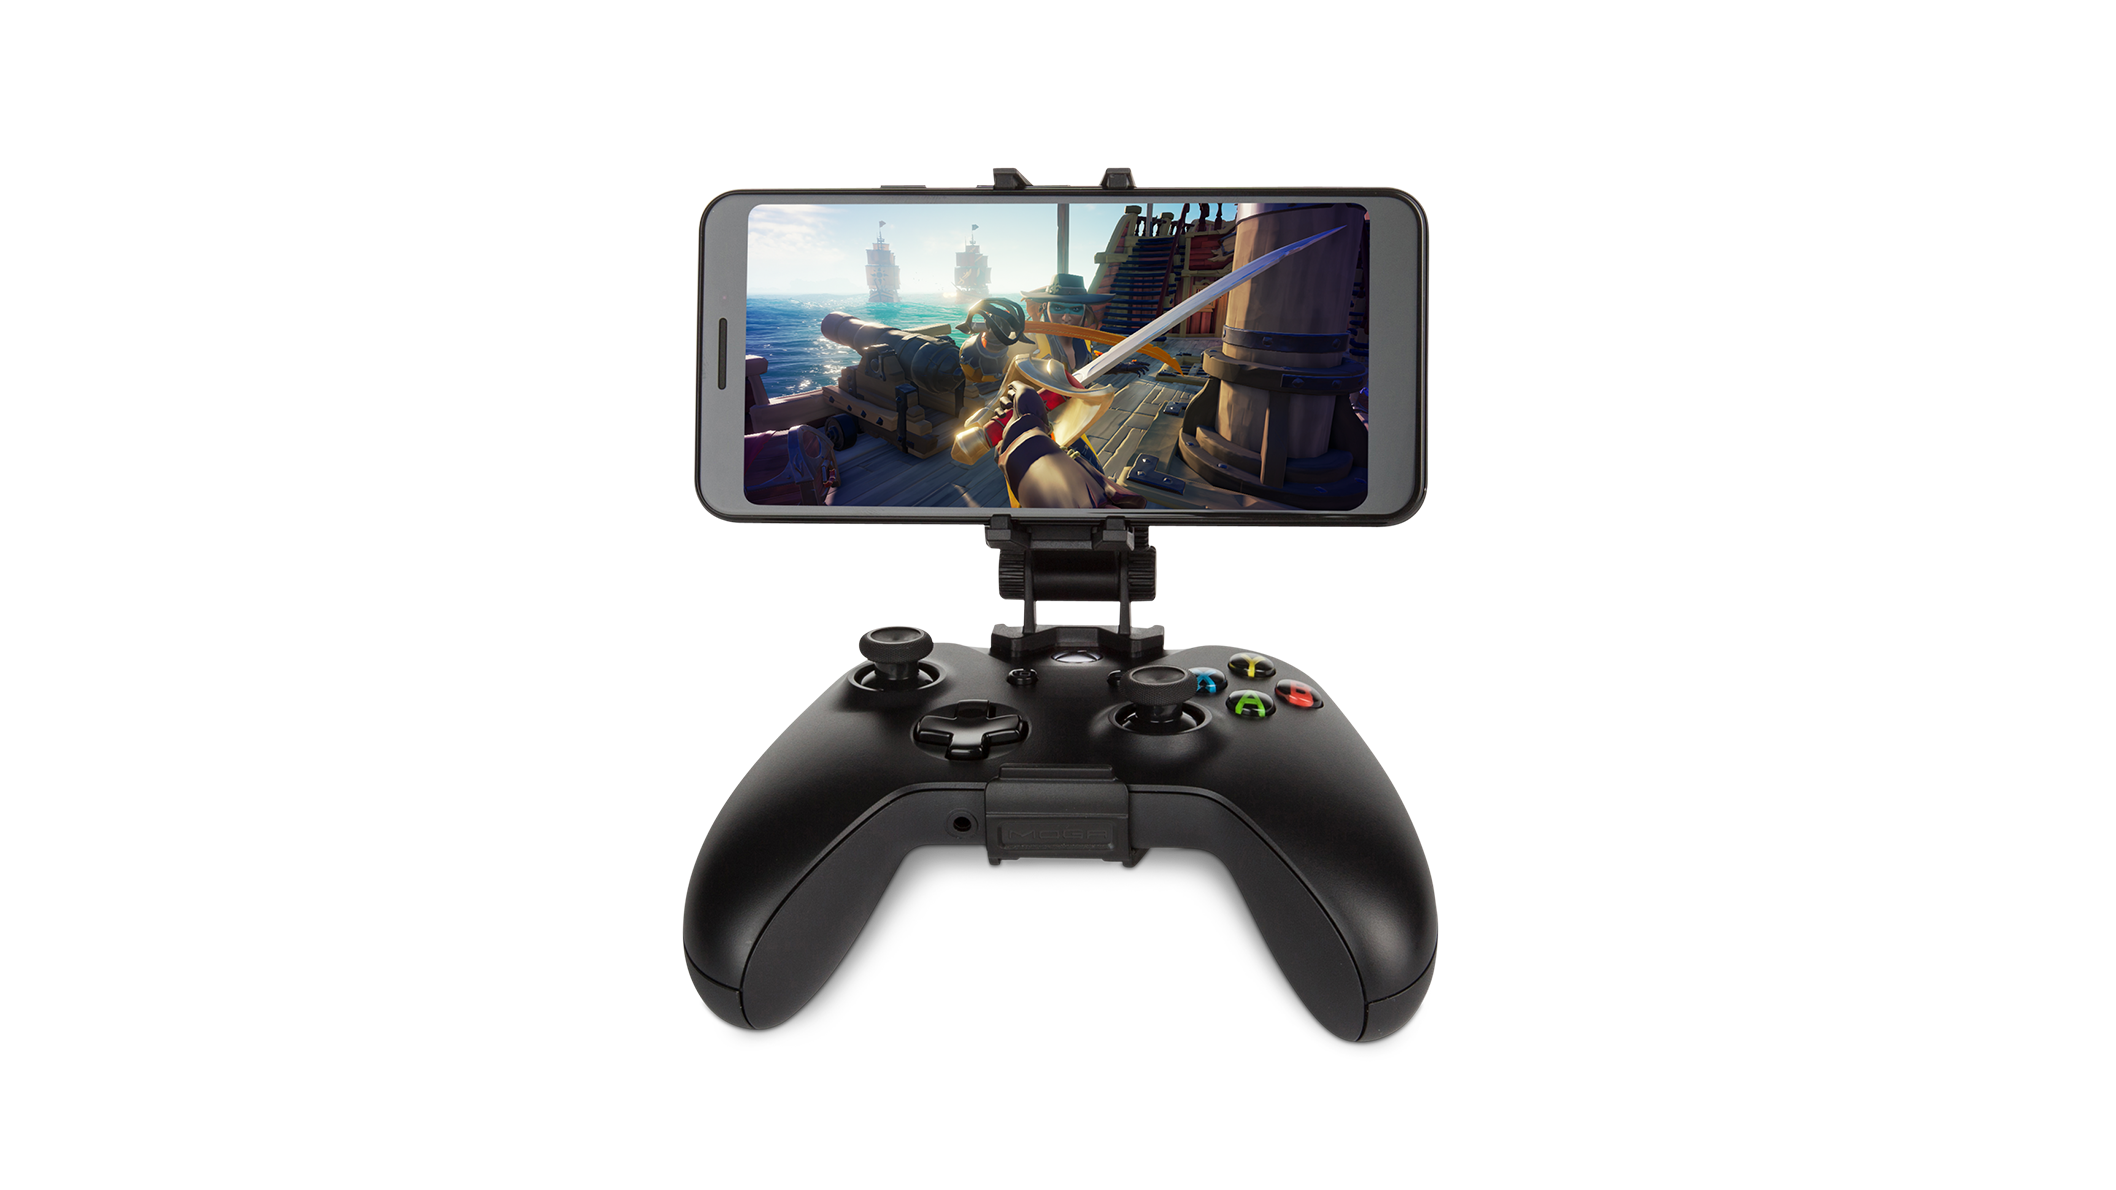 powera moga mobile gaming clip for xbox wireless controllers